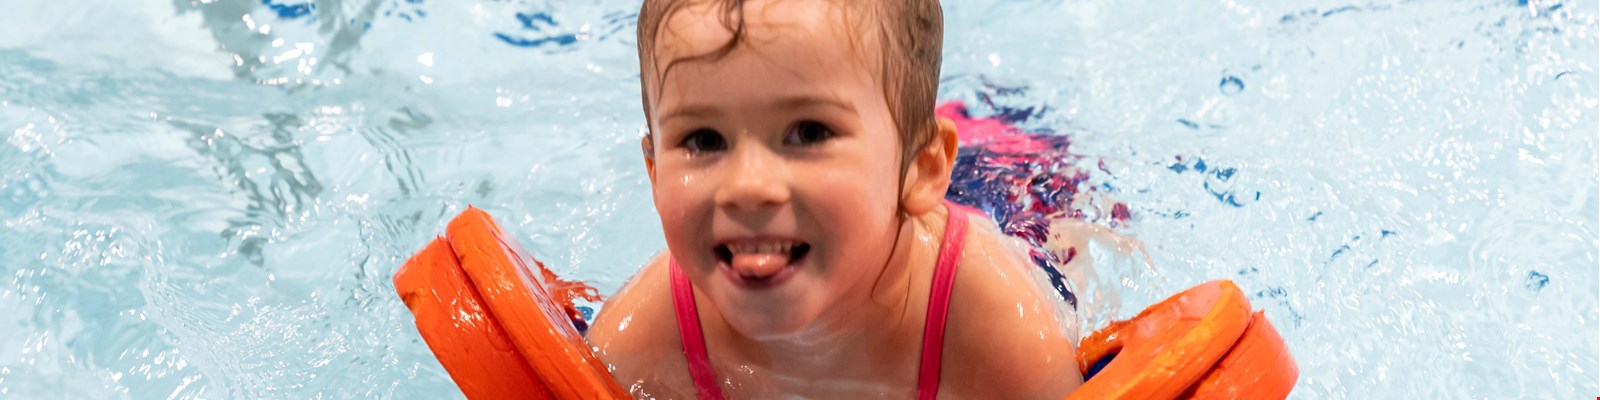 a child enjoying themselves in the pool with armbands